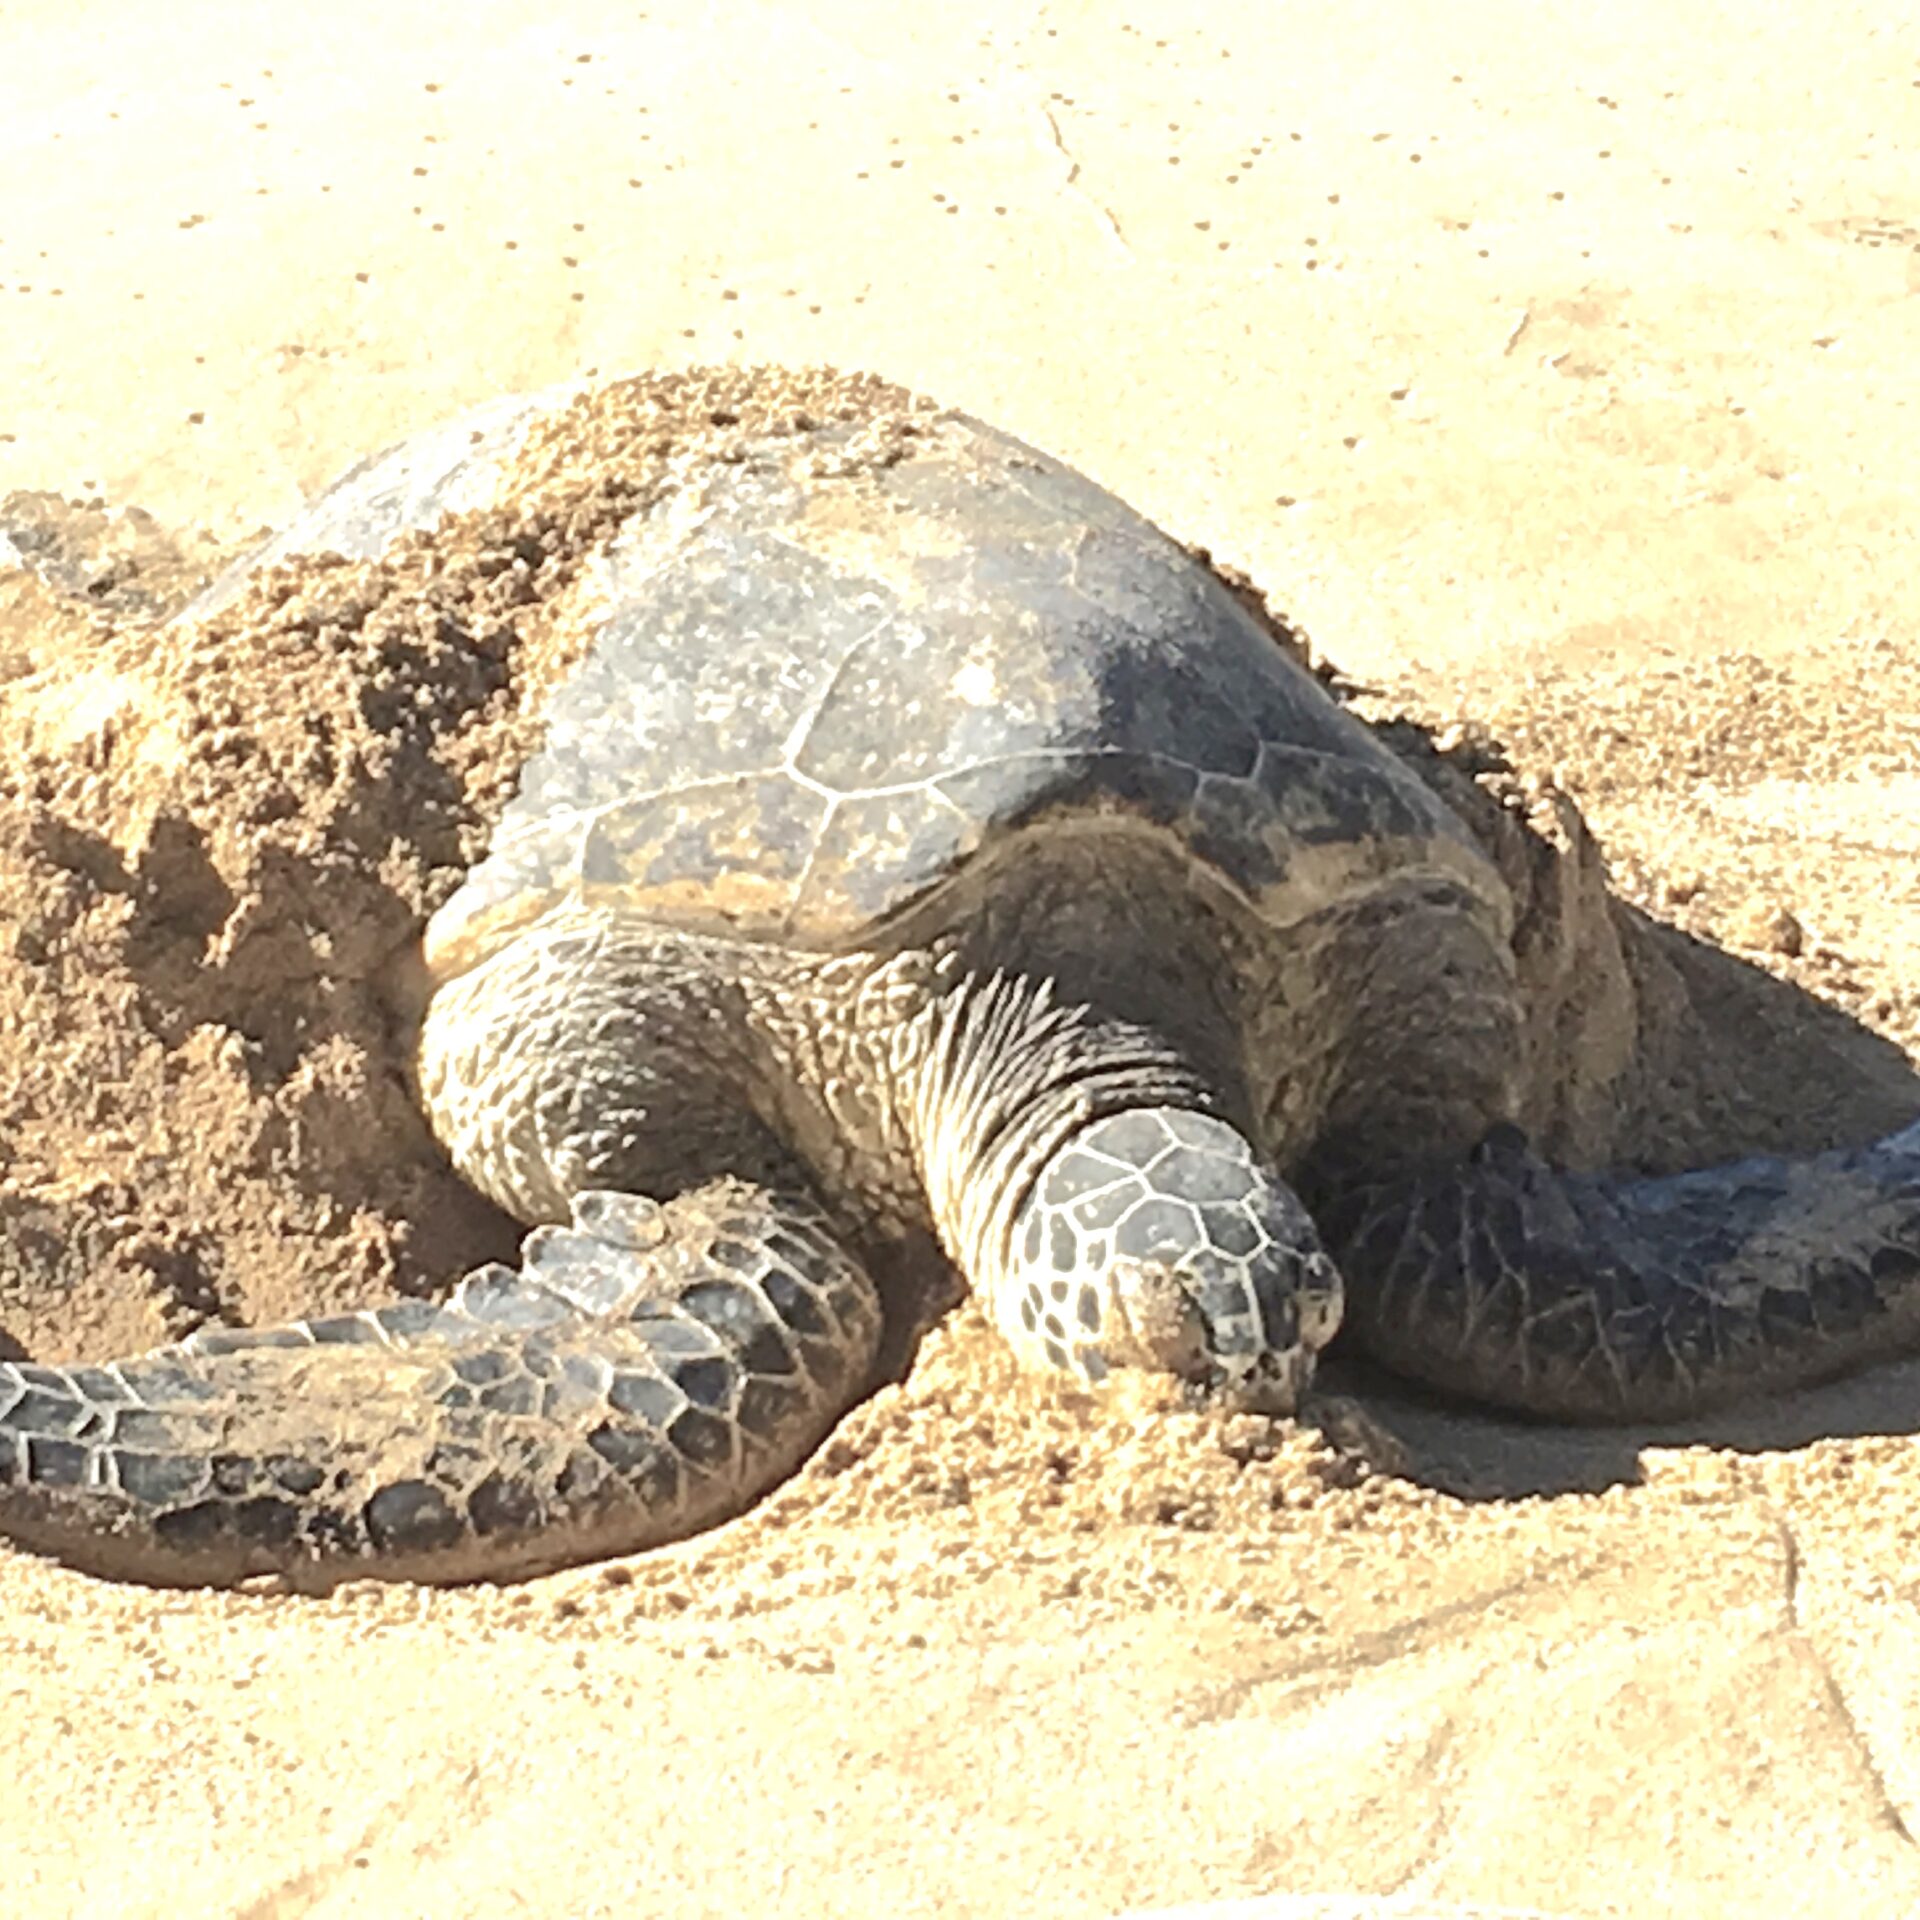 A turtle half buried in sand